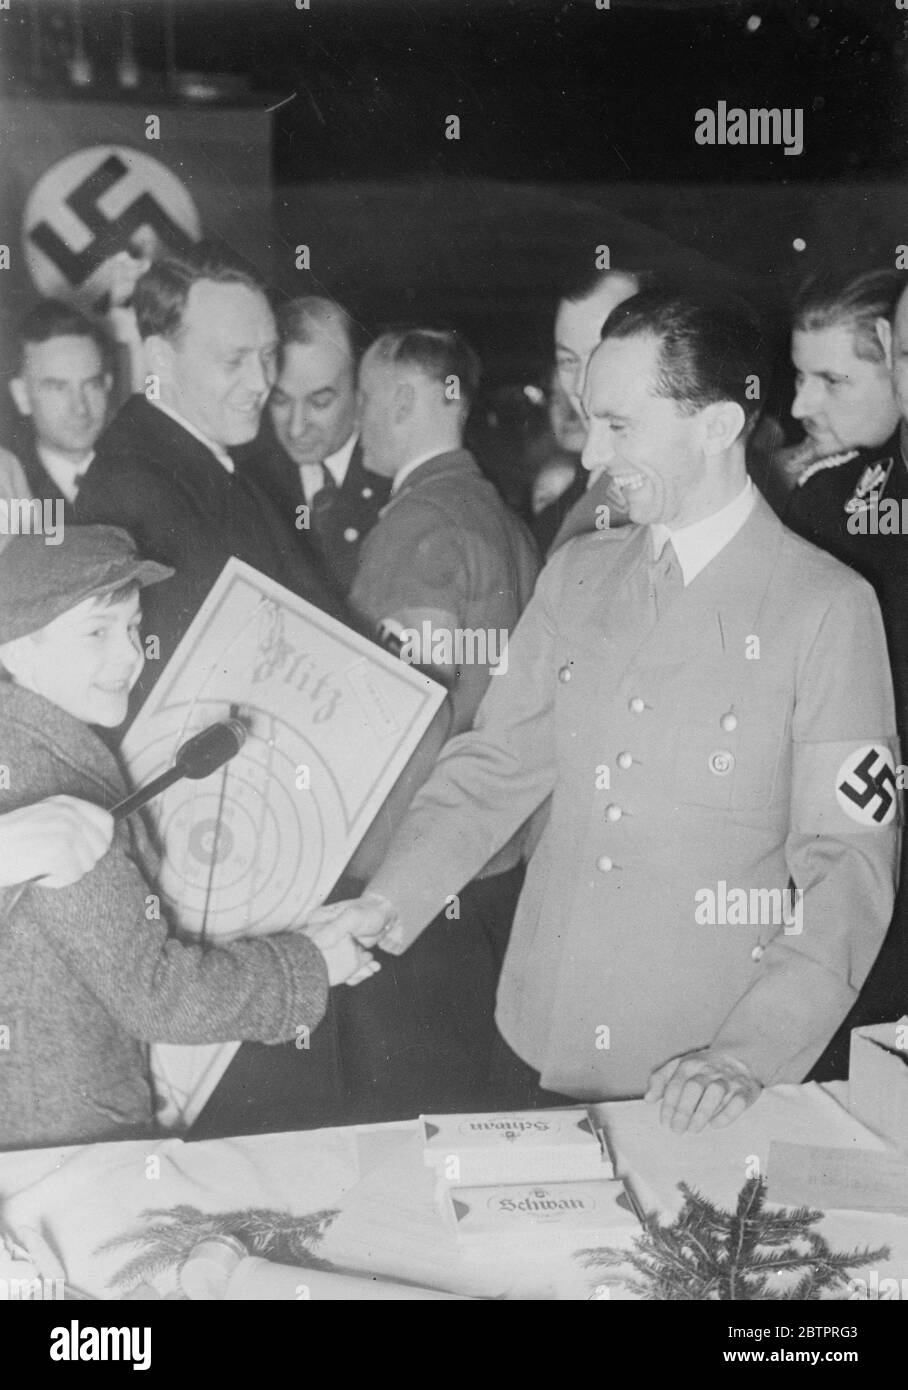 Dr Goebbel'-Santa Claus. Dr Goebbels, Nazi Propaganda Minister, smiling broadly as he shakes hands with a young guest after presenting a Christmas gift in Berlin. Presents were distributed to 150,000 children in Berlin under the winter help campaign. 25 December 1937 Stock Photo